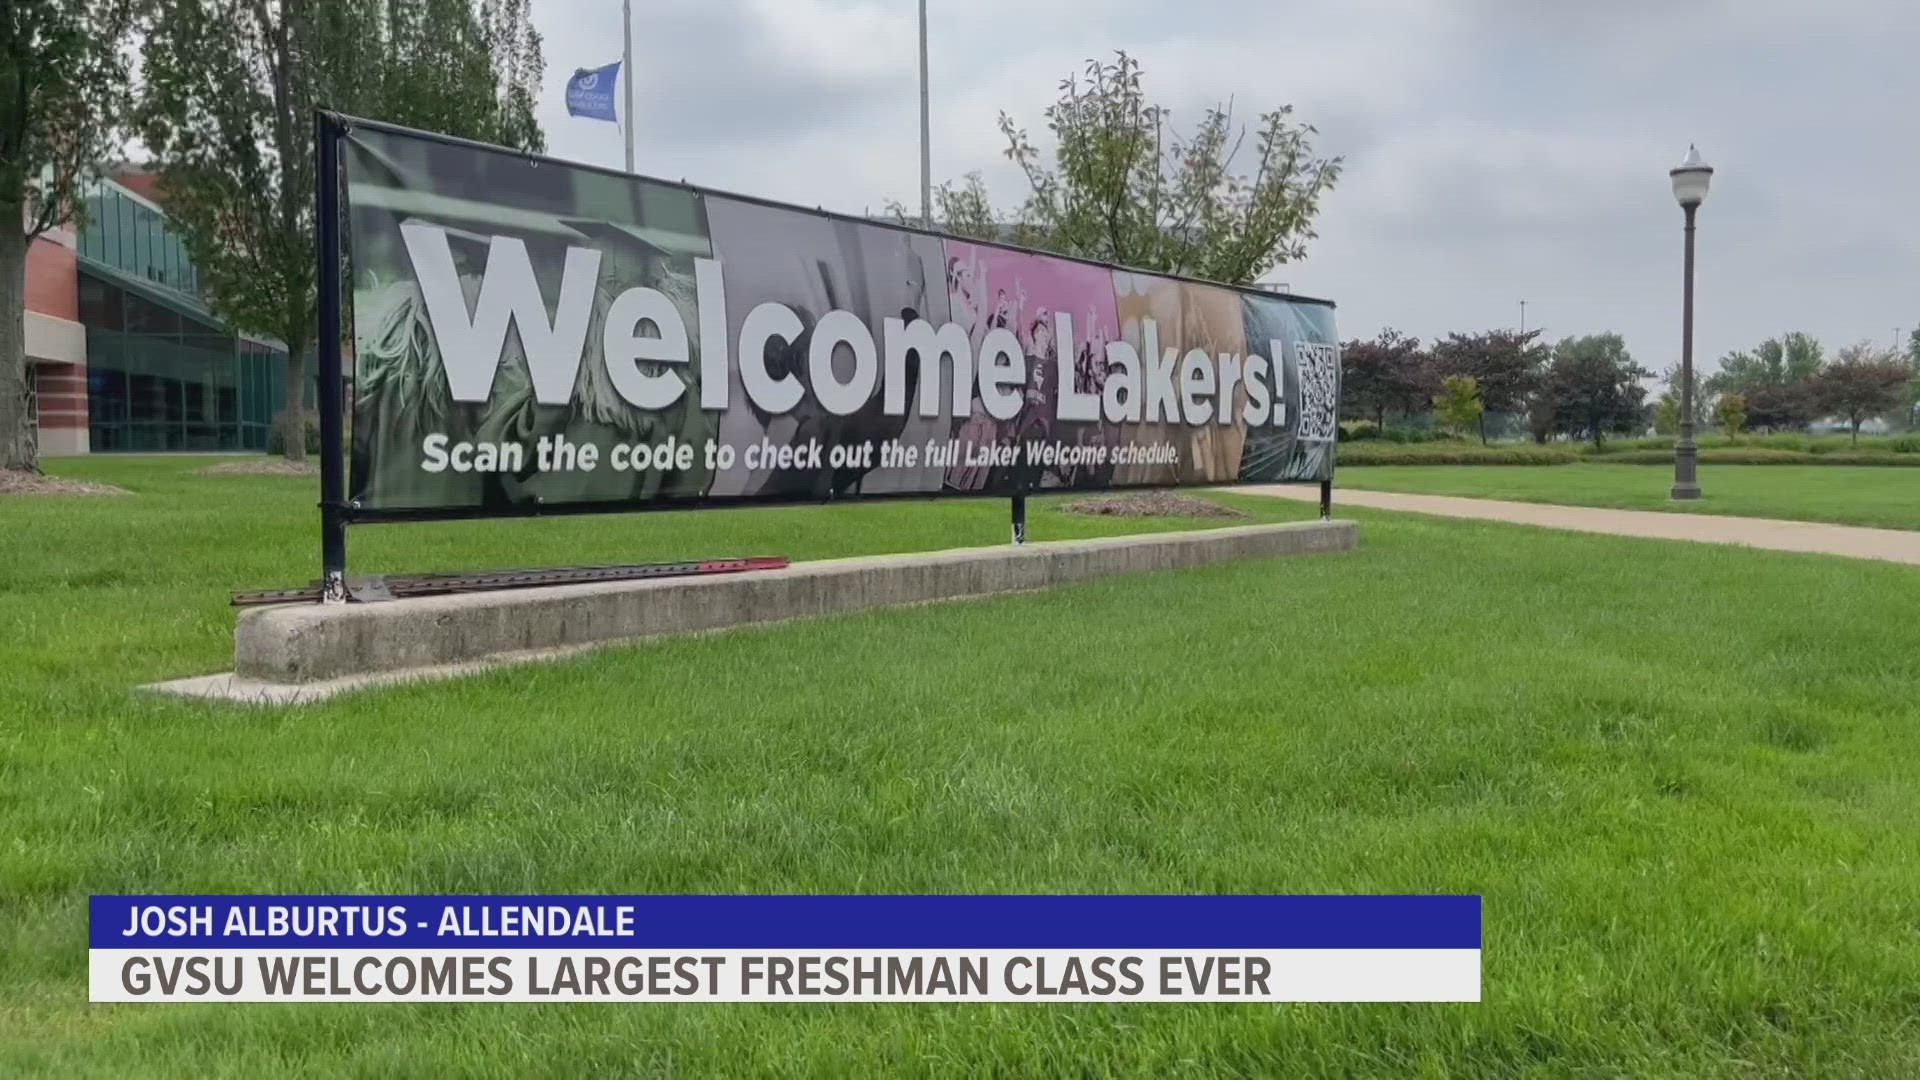 Grand Valley State University is welcoming students back to campus this week, including its largest freshman class in the university's history.